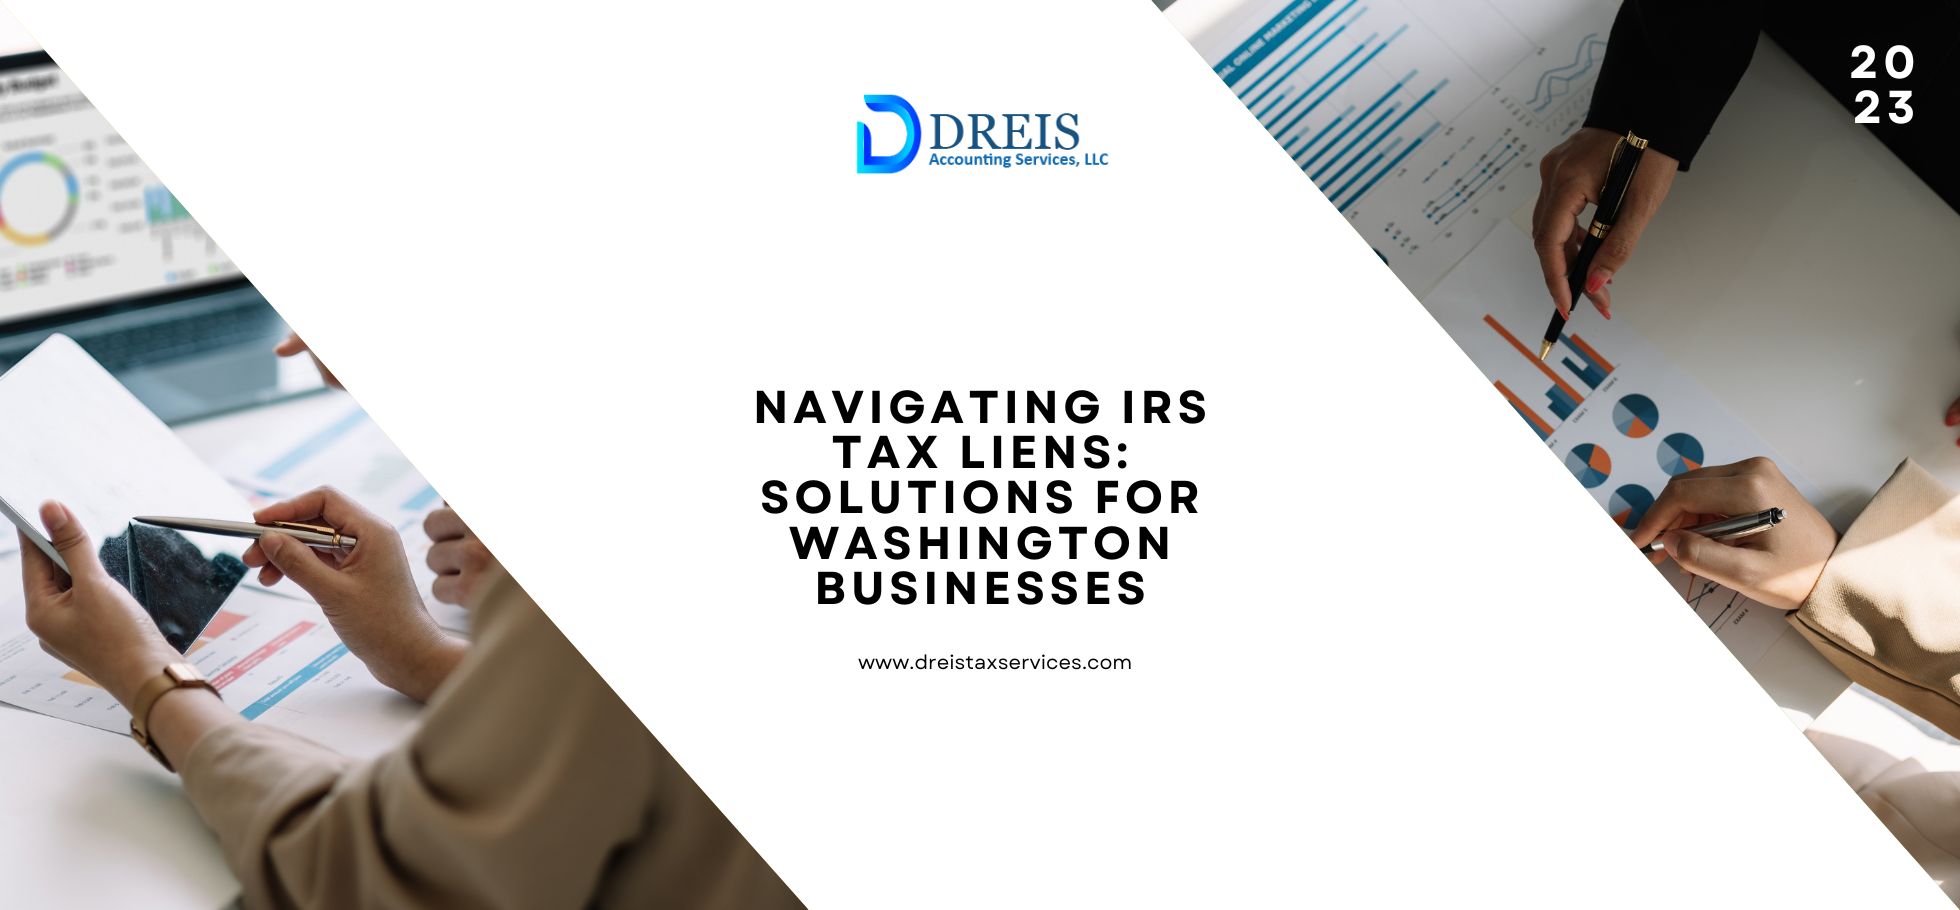 Navigating IRS Tax Liens Solutions for Washington Businesses